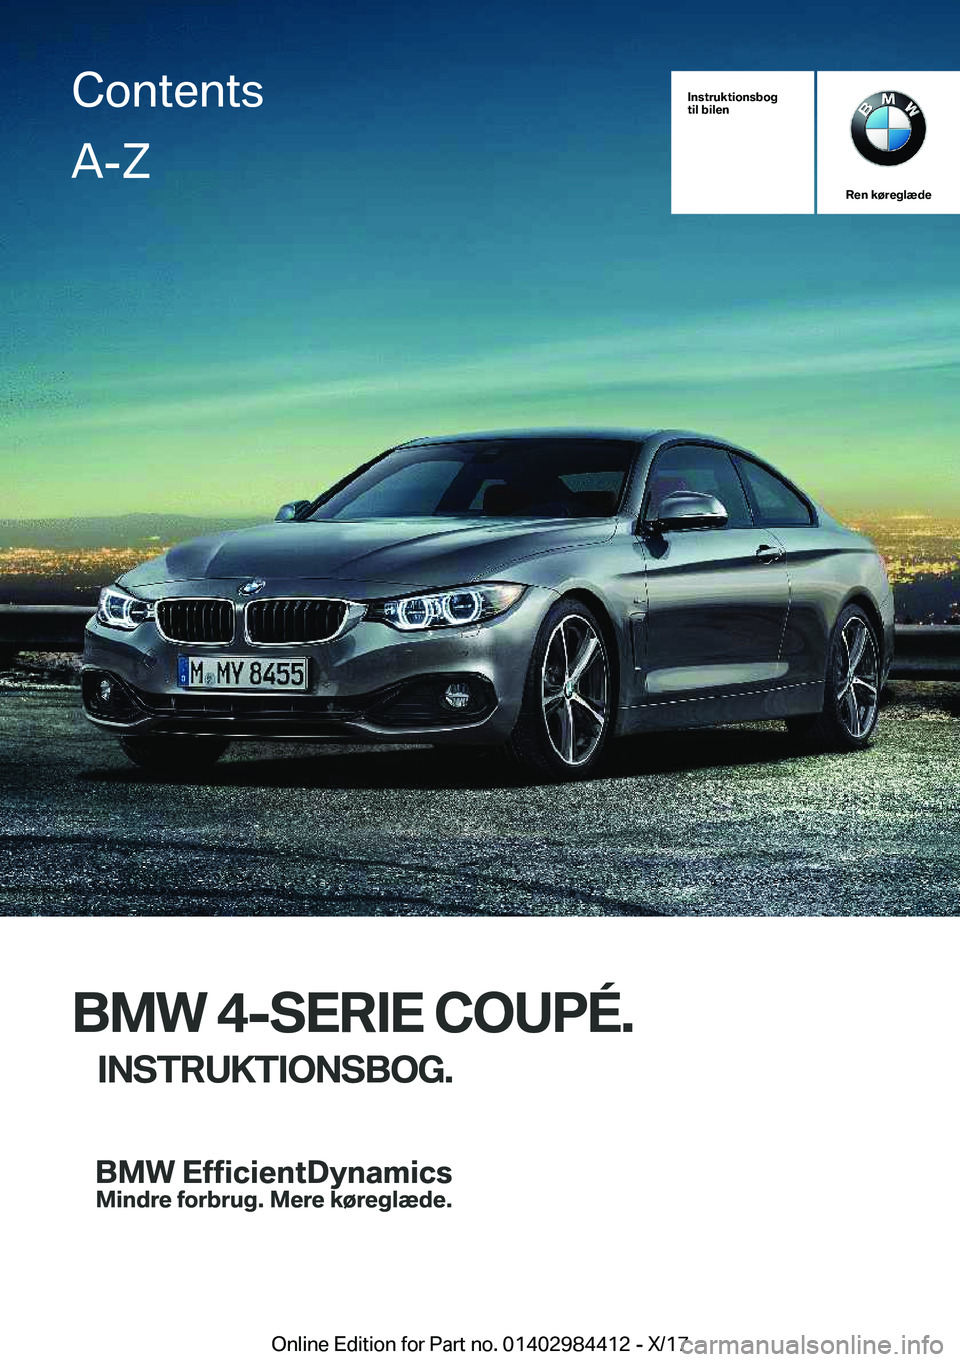 BMW 4 SERIES COUPE 2018  InstruktionsbØger (in Danish) �I�n�s�t�r�u�k�t�i�o�n�s�b�o�g
�t�i�l��b�i�l�e�n
�R�e�n��k�